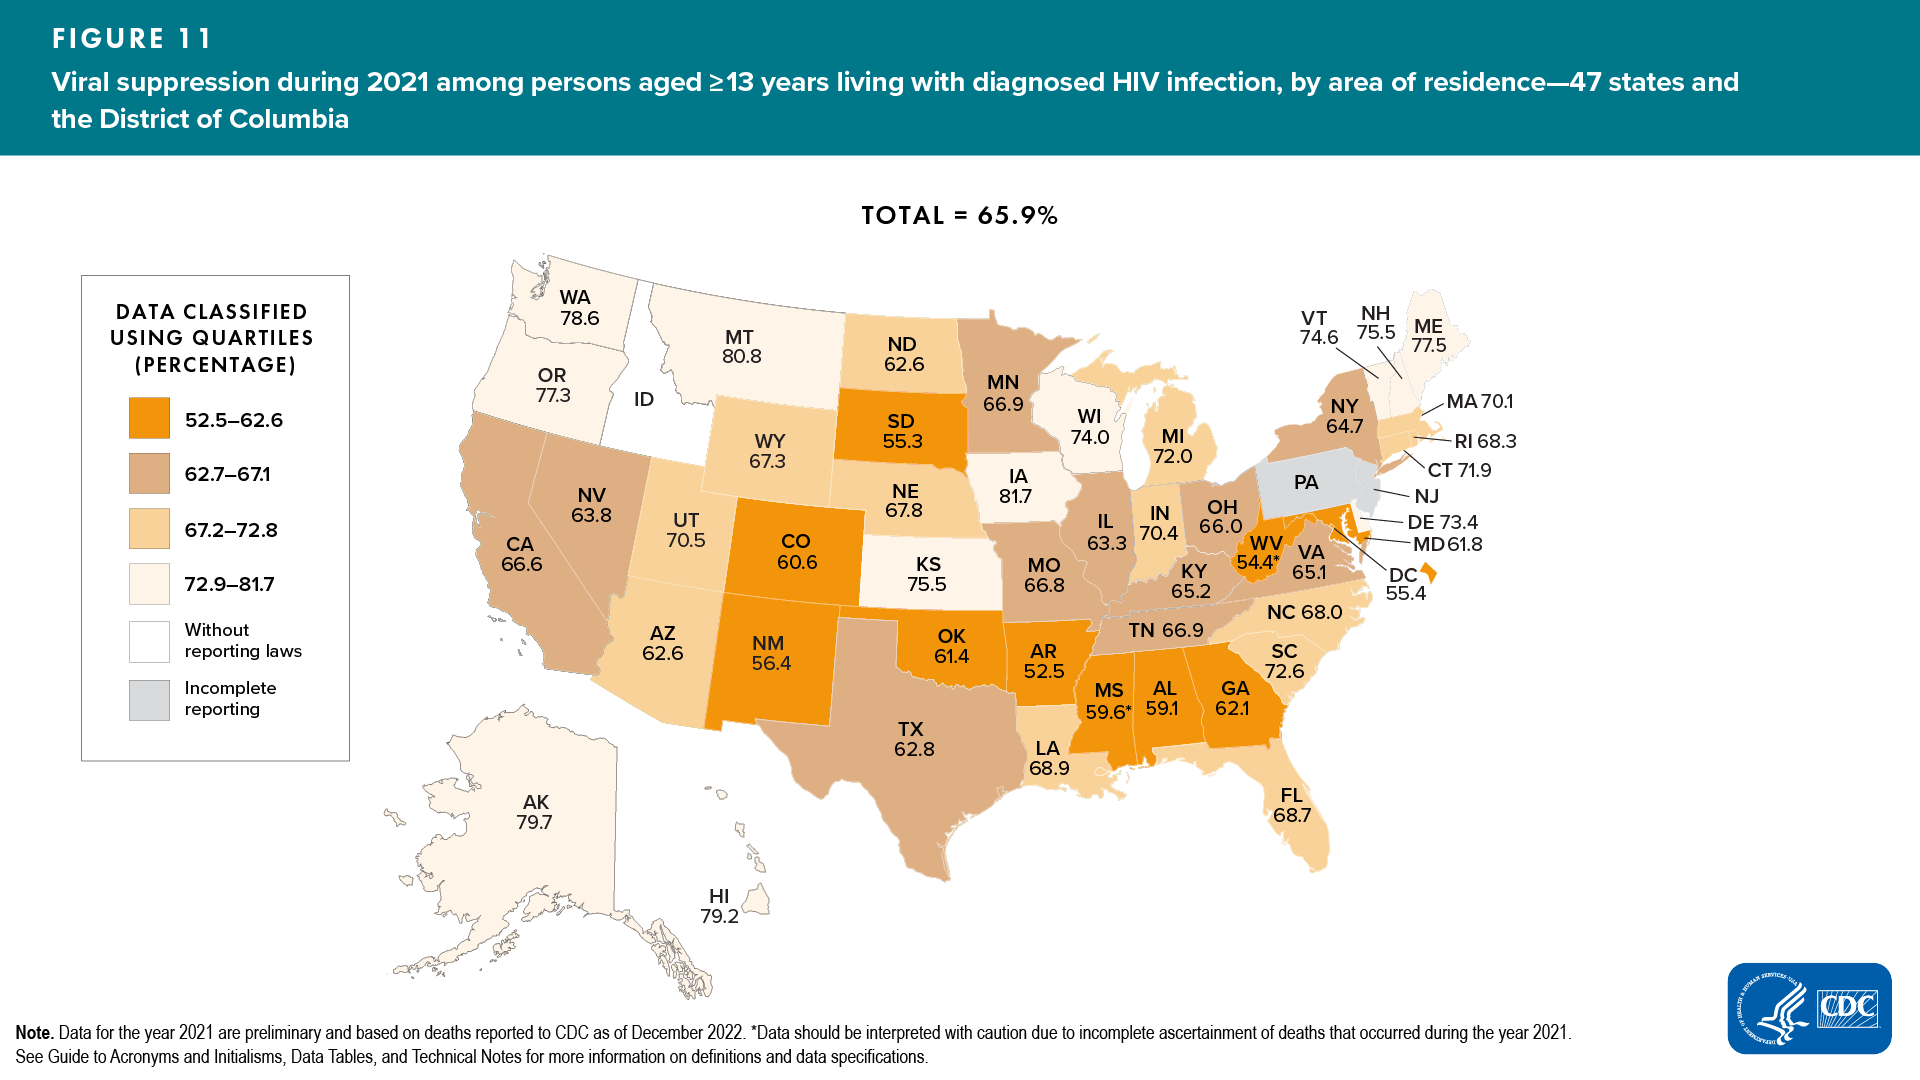 Figure 11. Viral suppression during 2021 among persons aged ≥13 years living with diagnosed HIV infection, by area of residence — 47 states and the District of Columbia